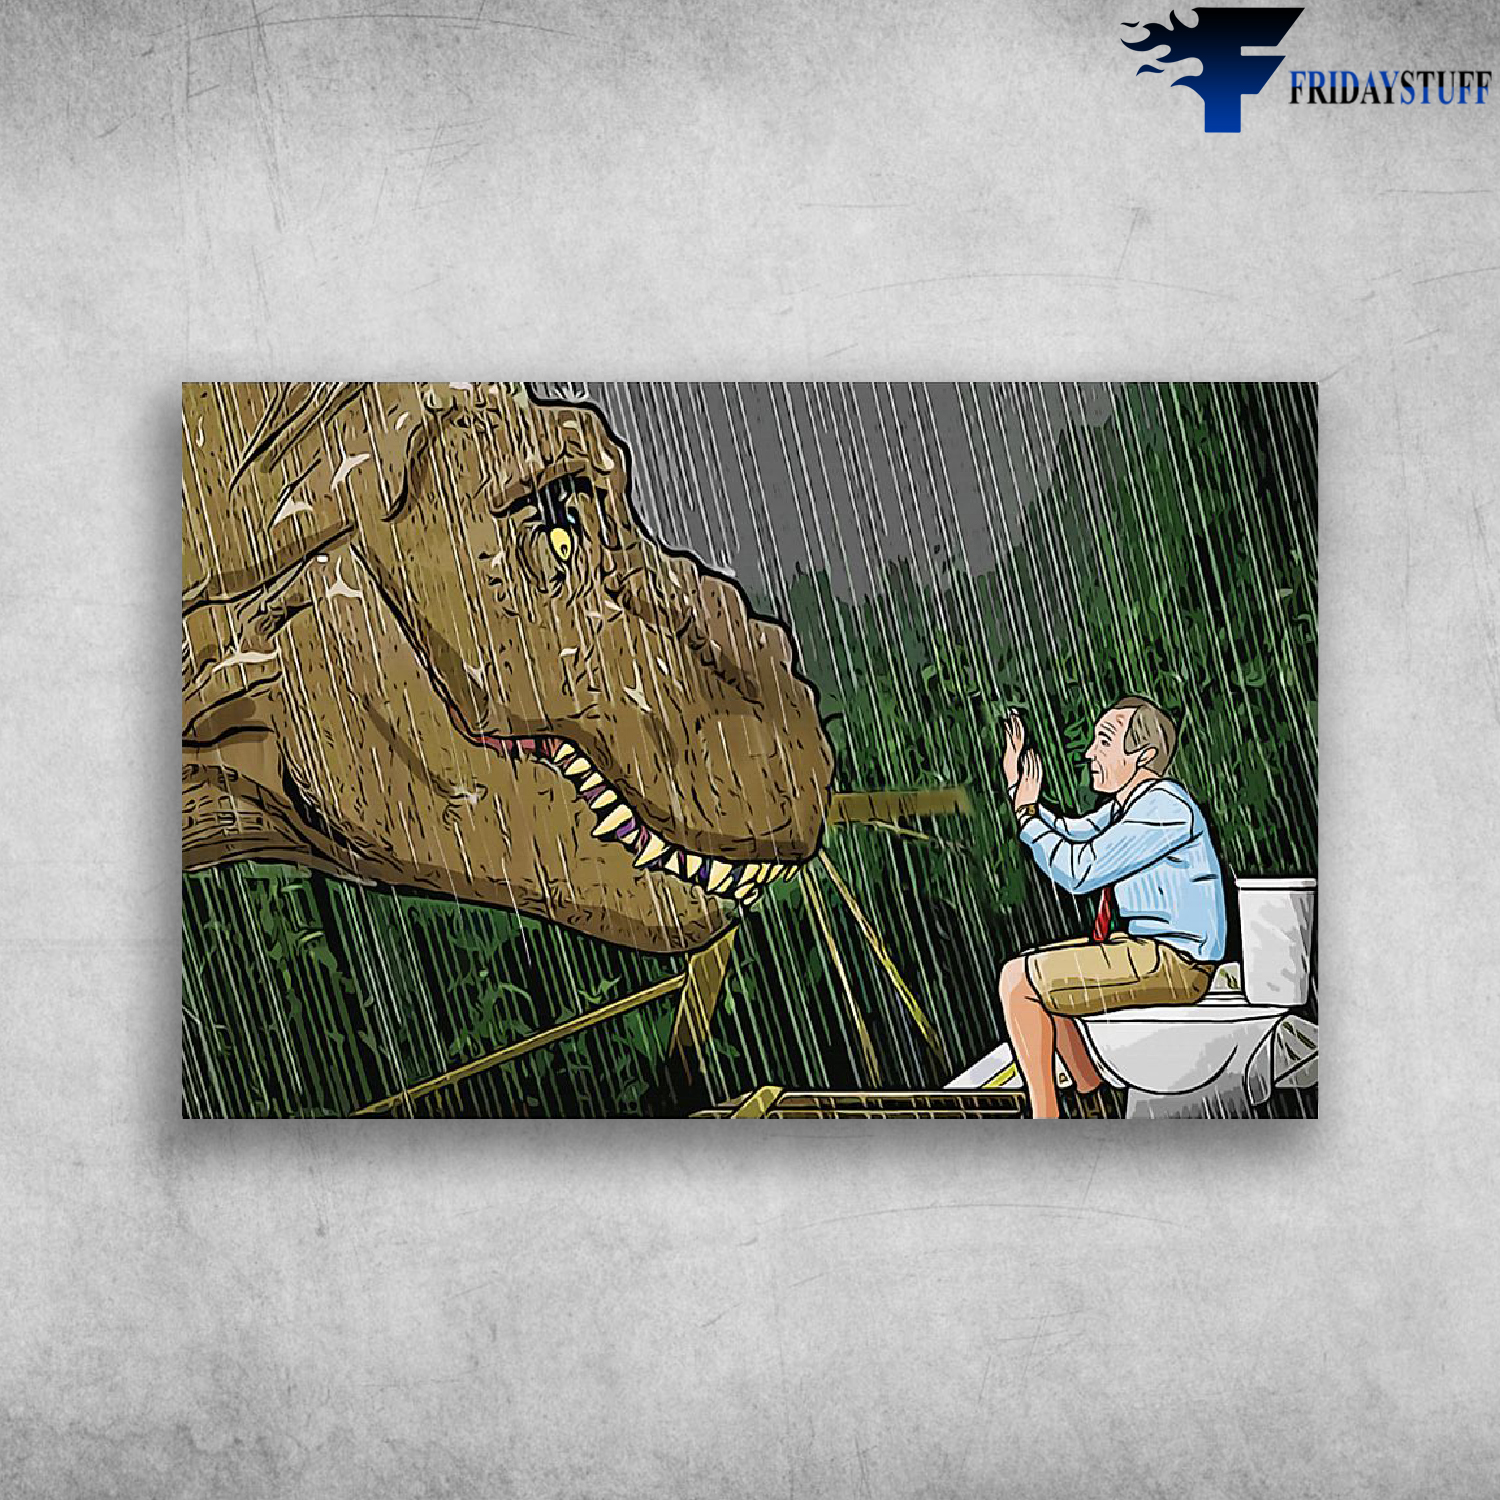 dinosaur T-rex Look at The Man is sitting in the toilet out it's raining outside